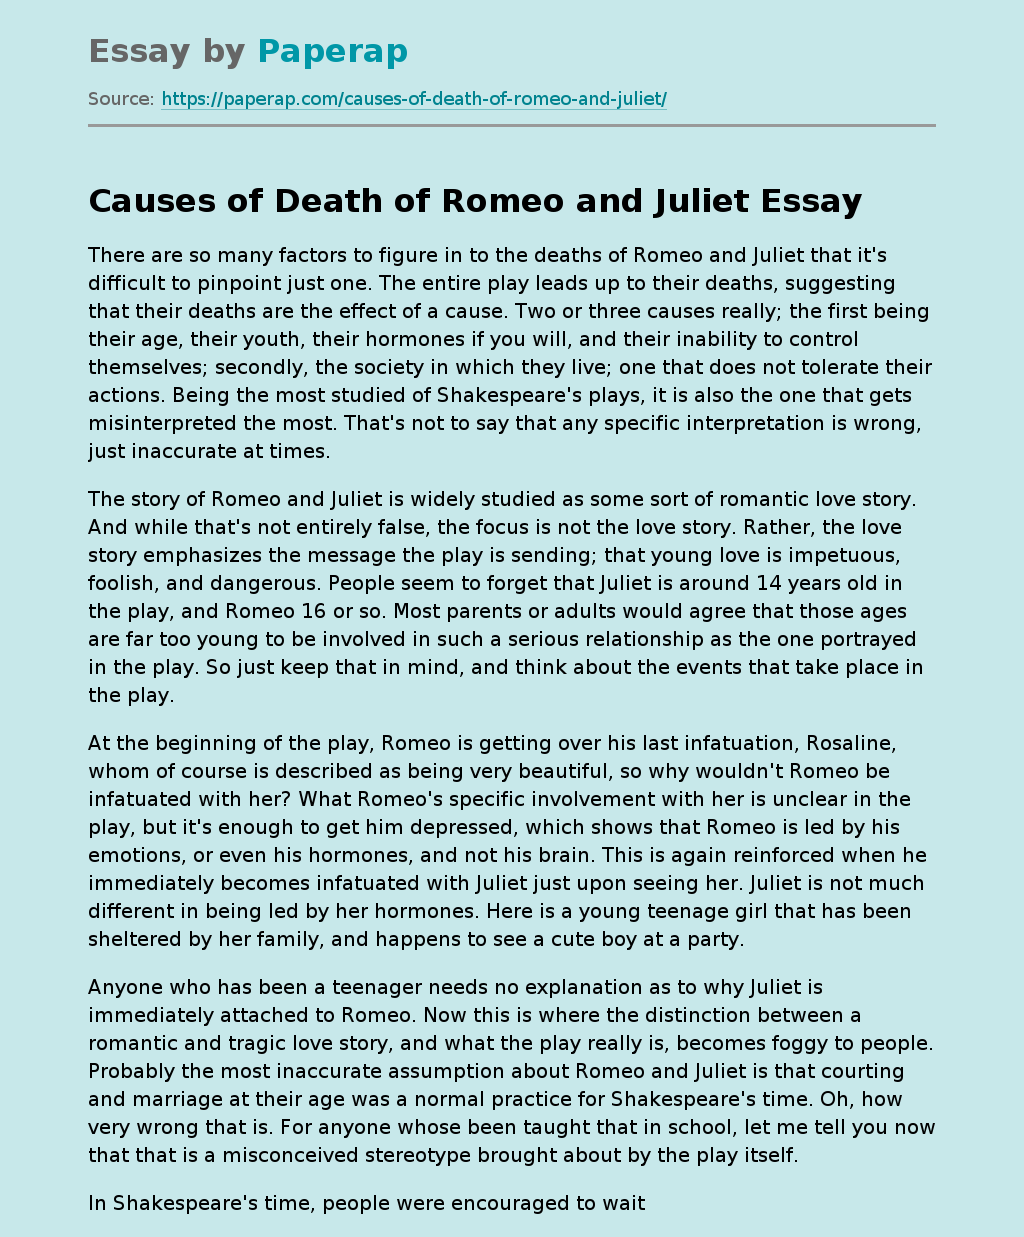 Causes of Death of Romeo and Juliet